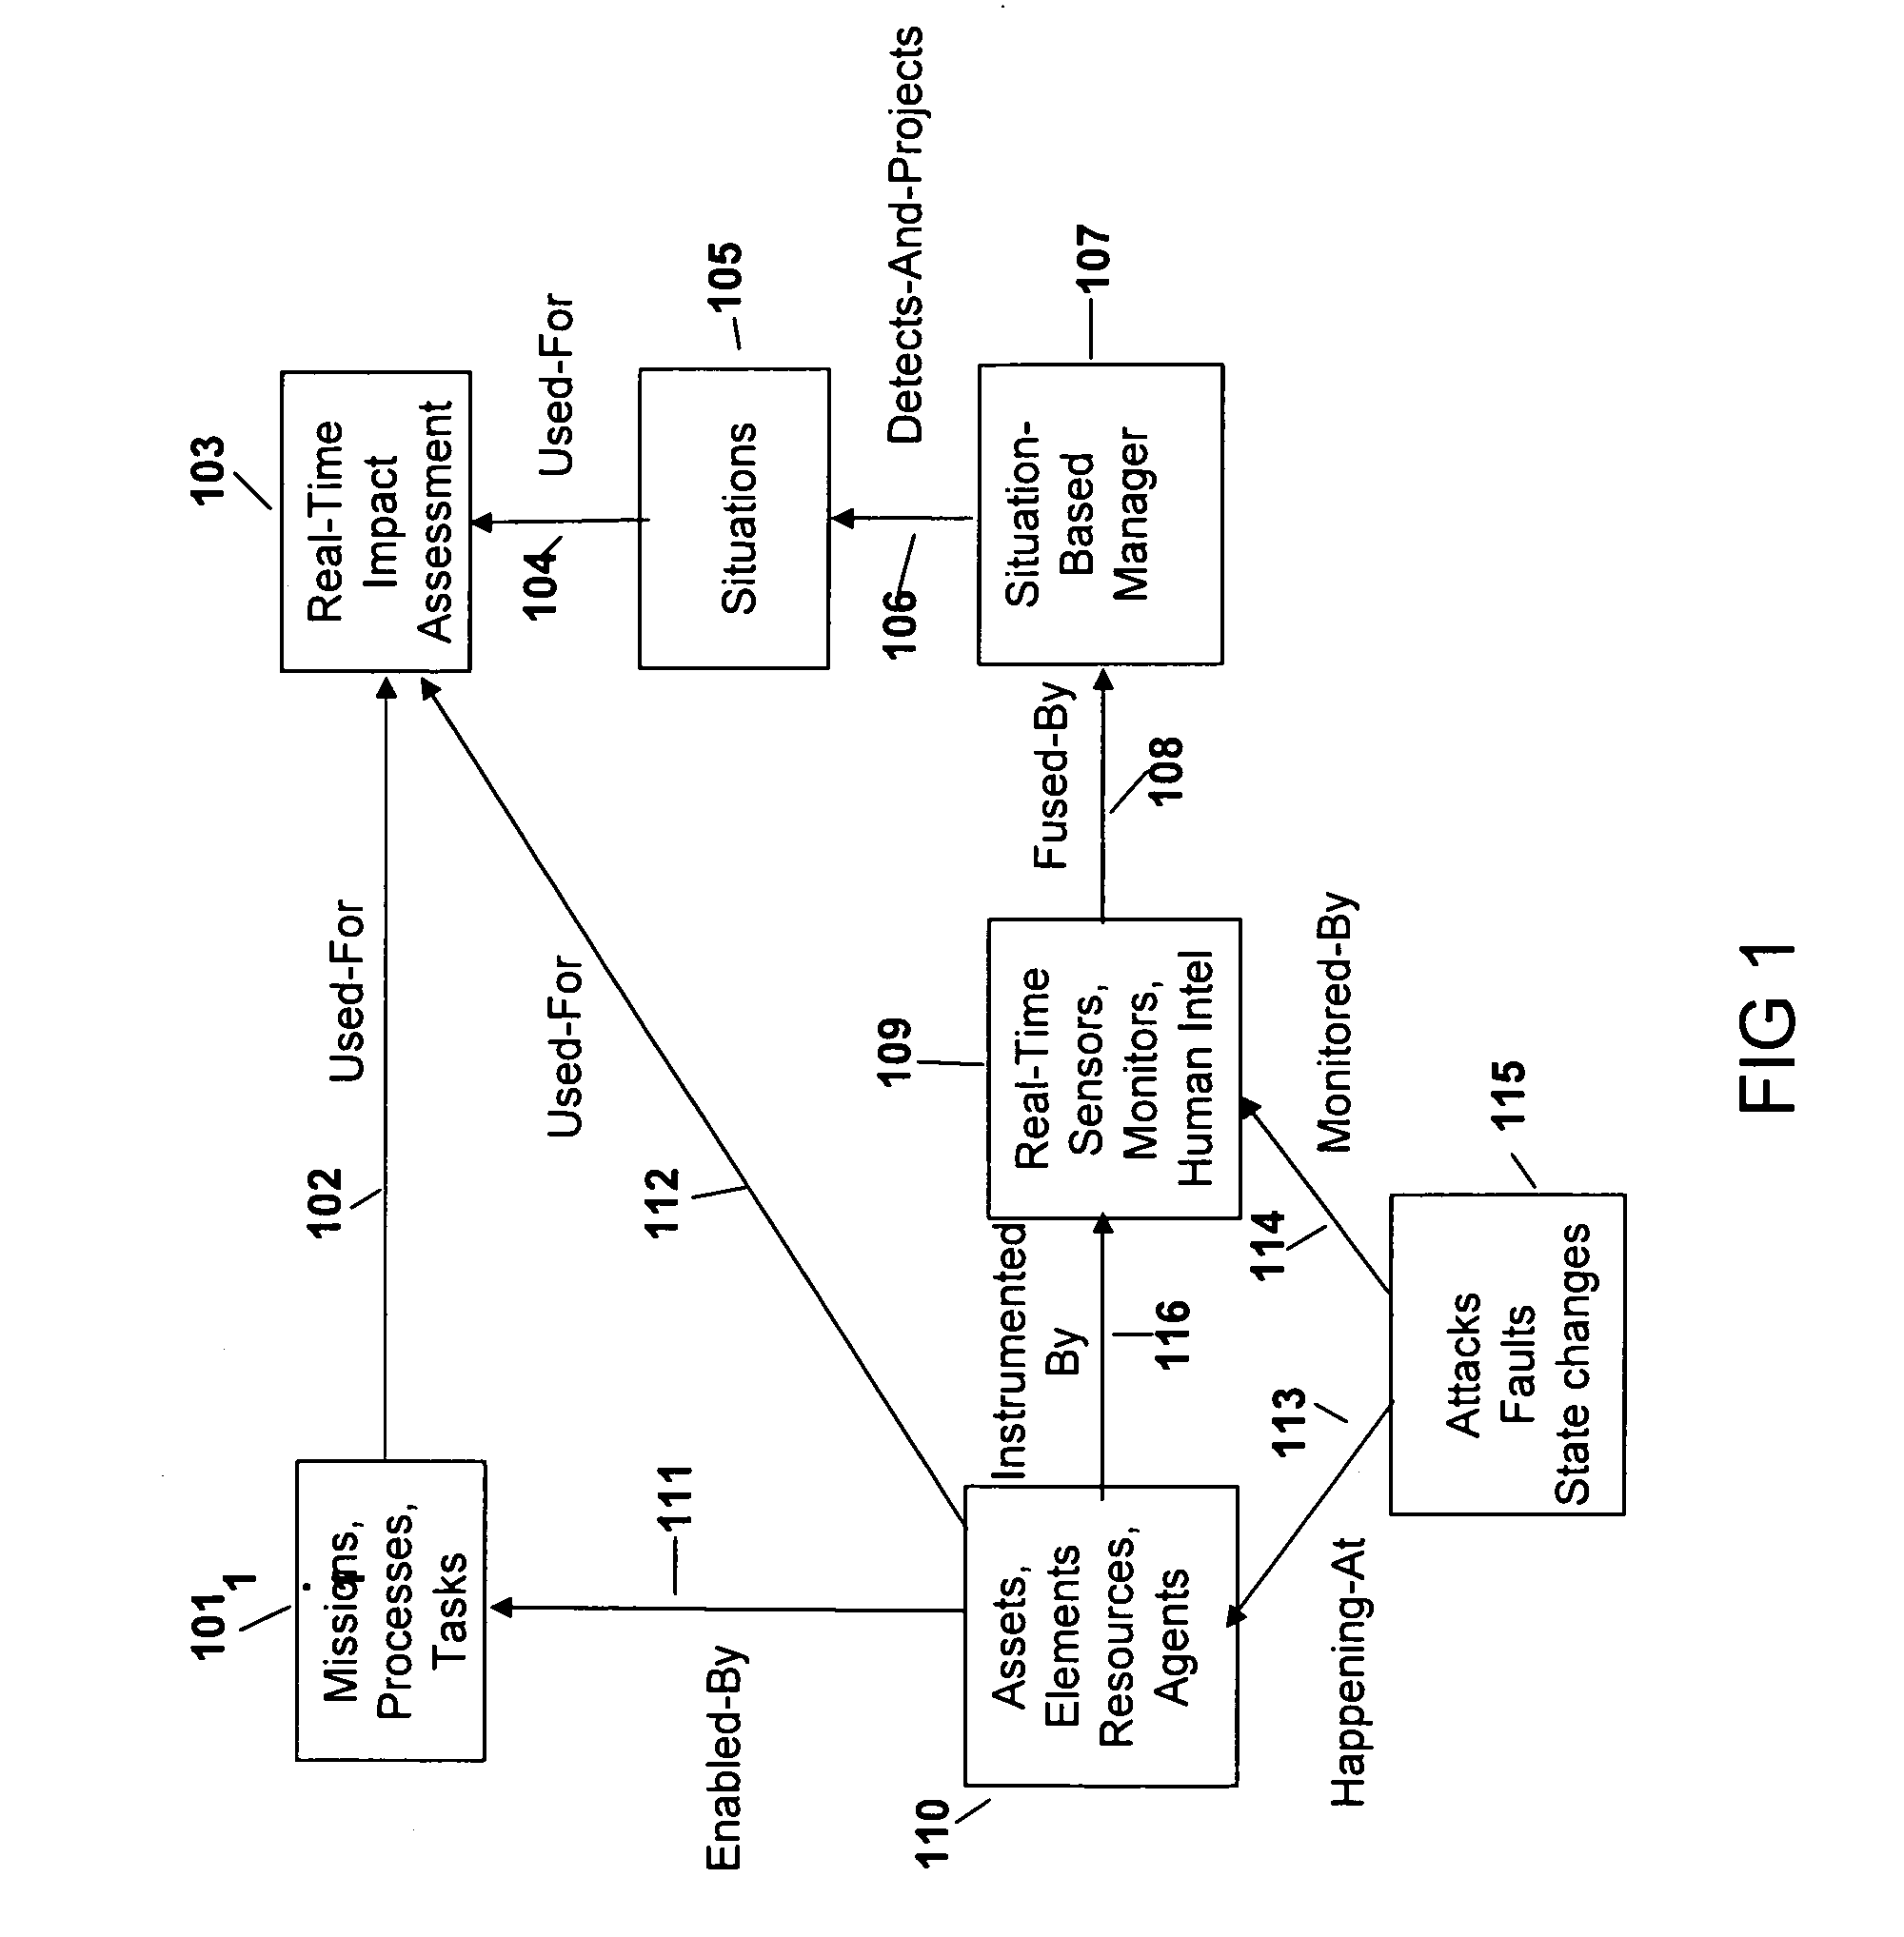 Method and Apparatus for Real-Time Automated Impact Assessment